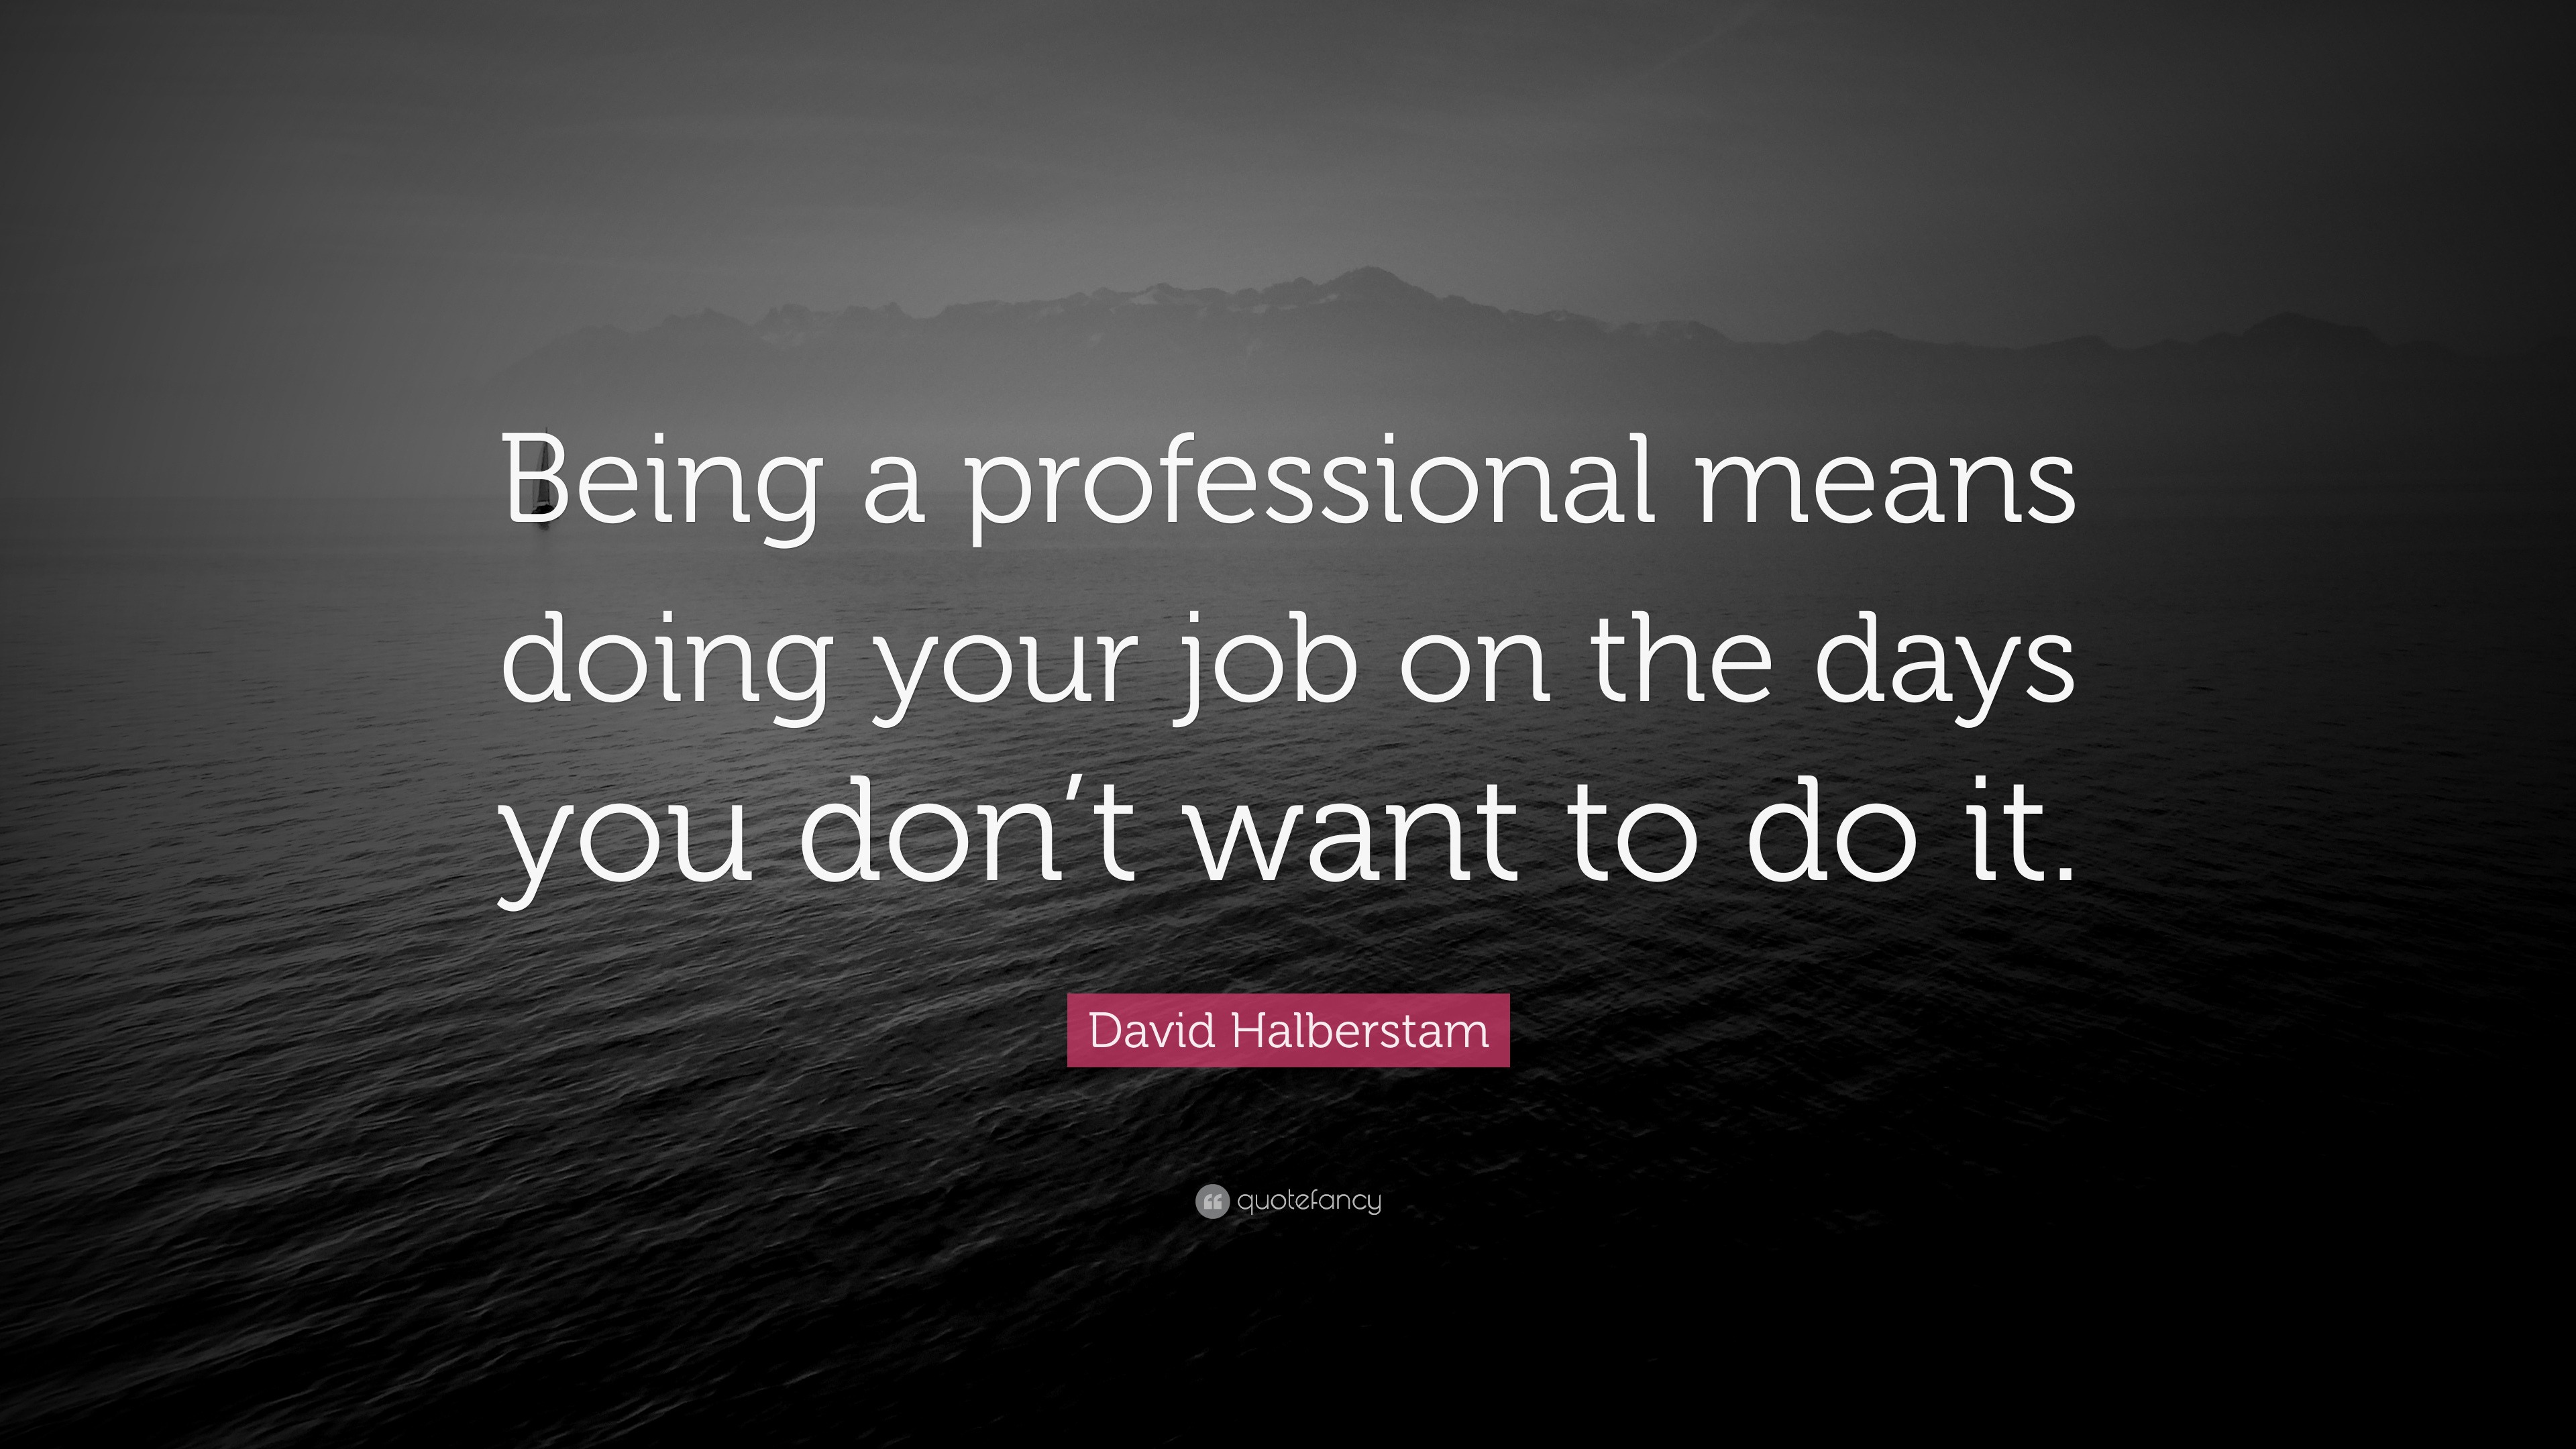 David Halberstam Quote “Being a professional means doing